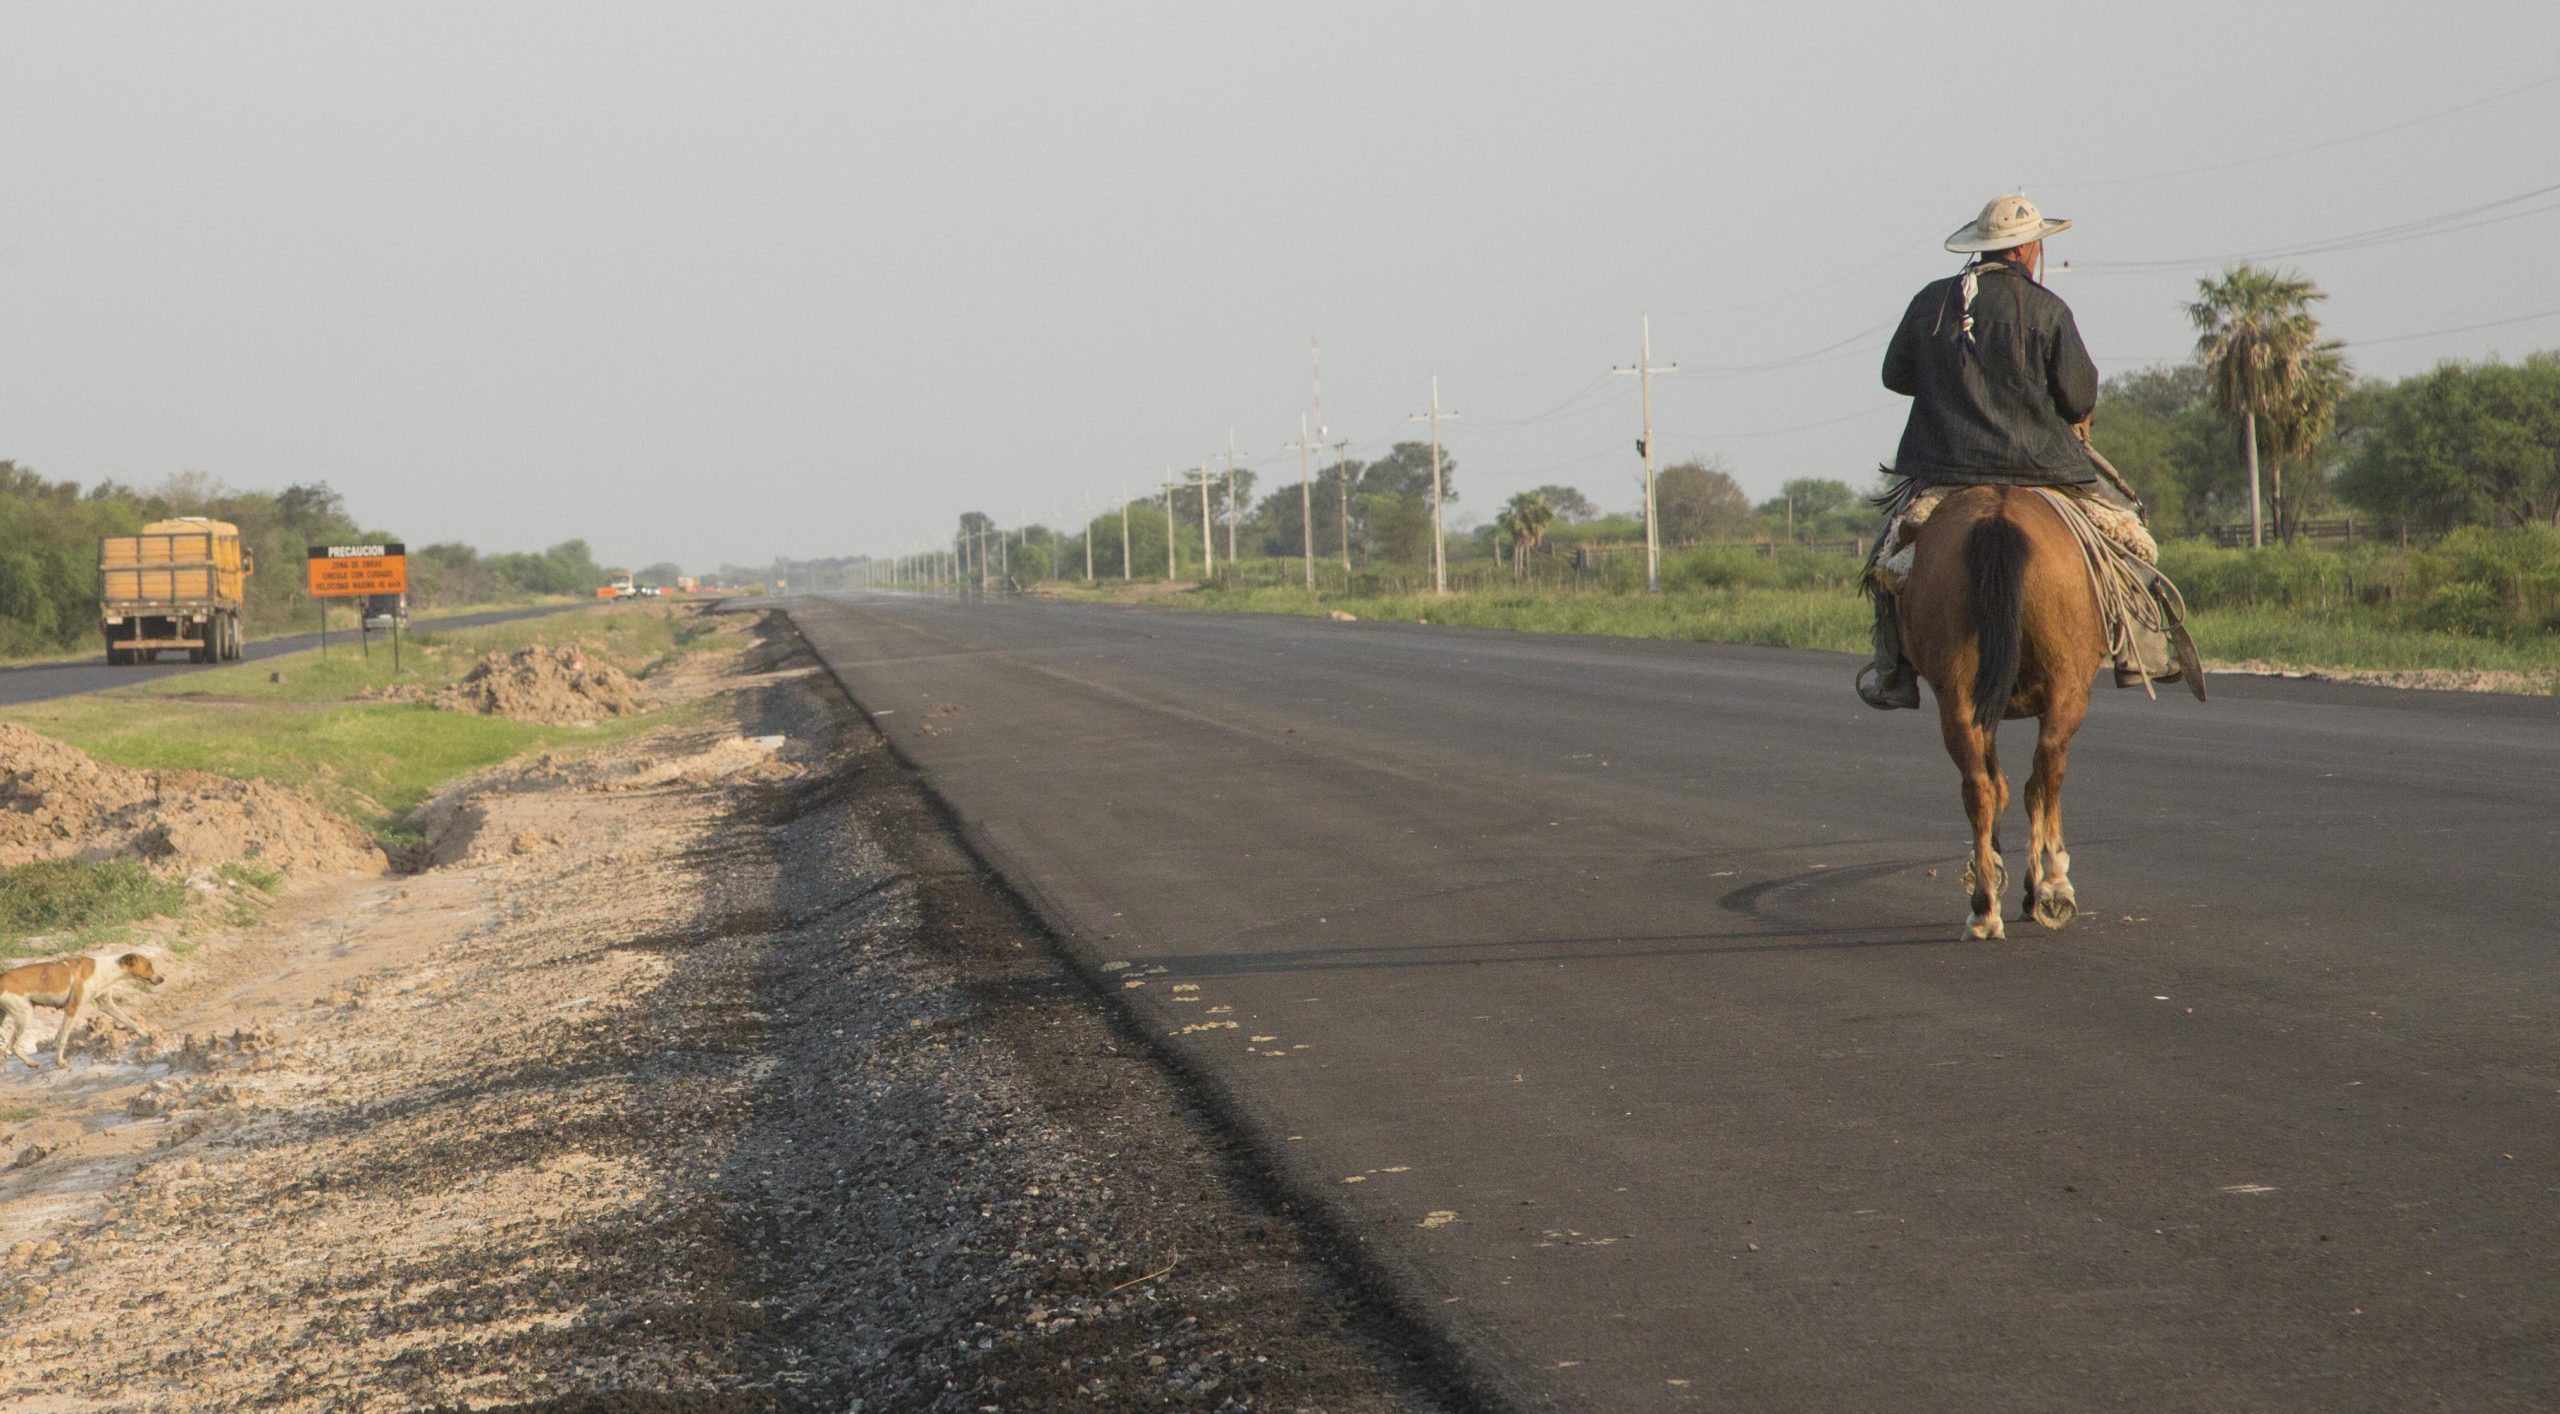 <p><span style="font-weight: 400;">A cattle farmer rides along a nearly completed section of the Bioceanic Corridor, a project seeking to improve connectivity through Paraguay’s Gran Chaco (Image: Santi Carneri/Diálogo Chino)</span></p>